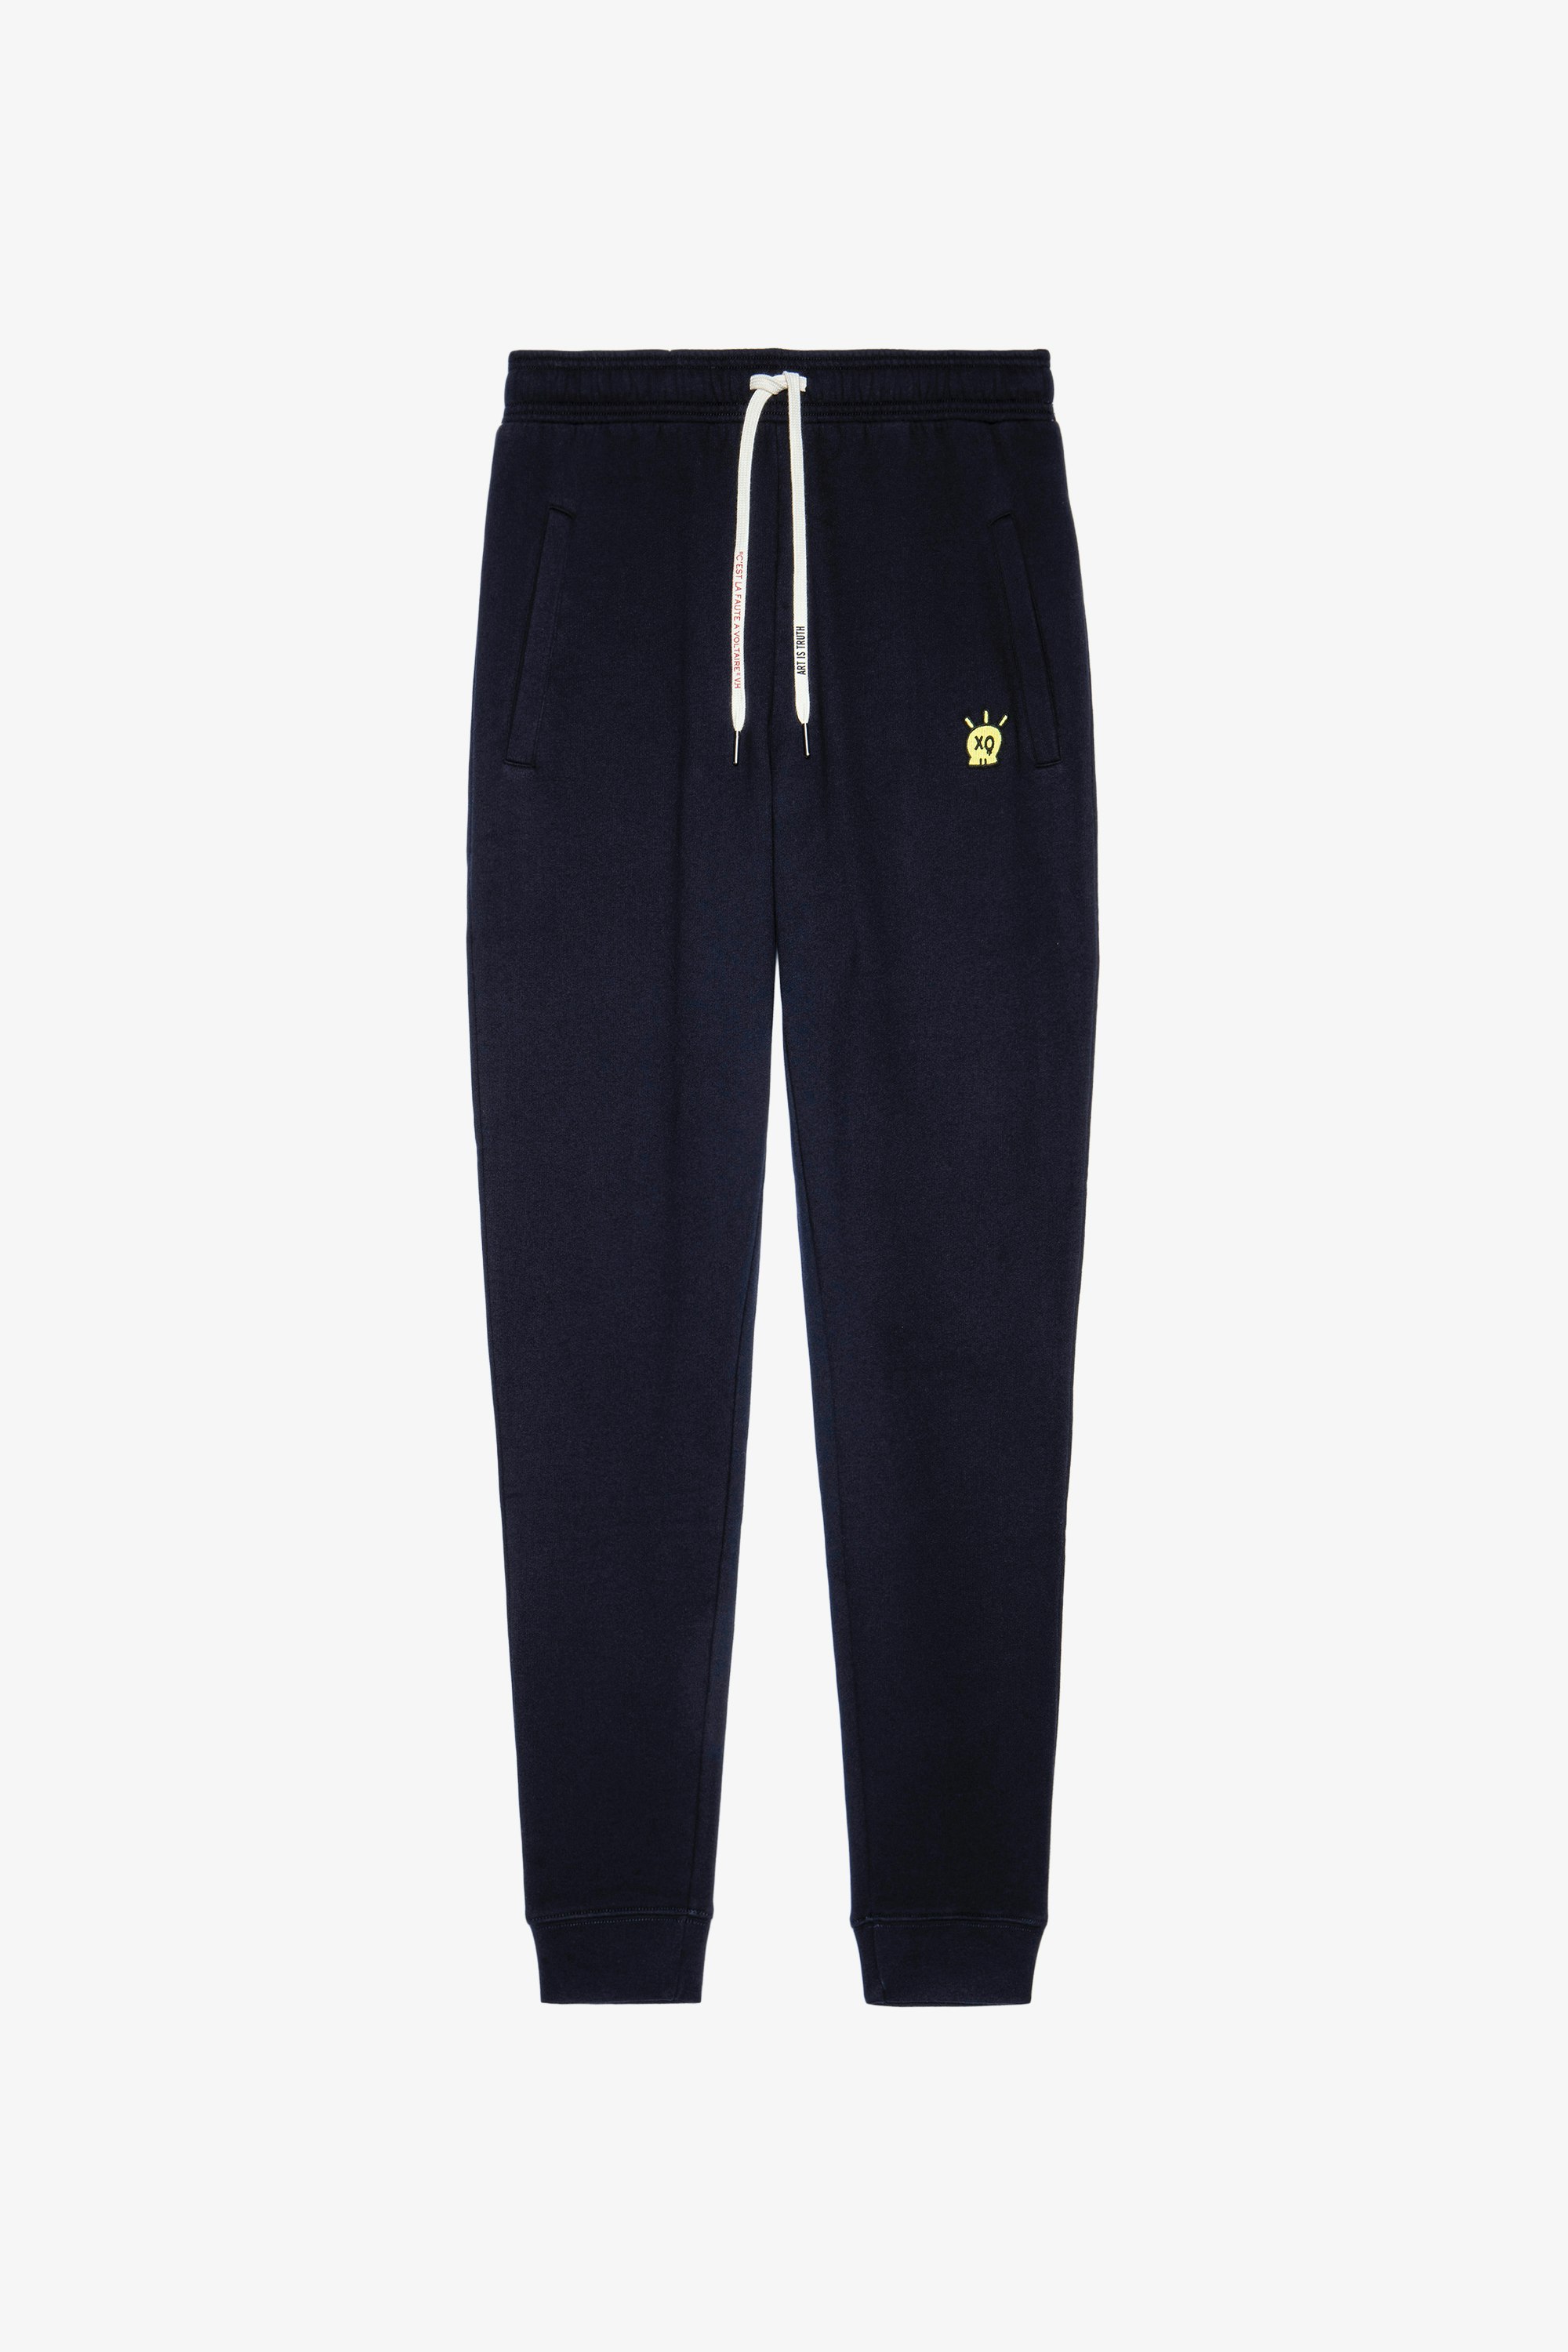 Capri Skull Trousers Men's fleece tracksuit bottoms in ink colour with skull patch. This product is GOTS certified and made with fibers from organic farming.